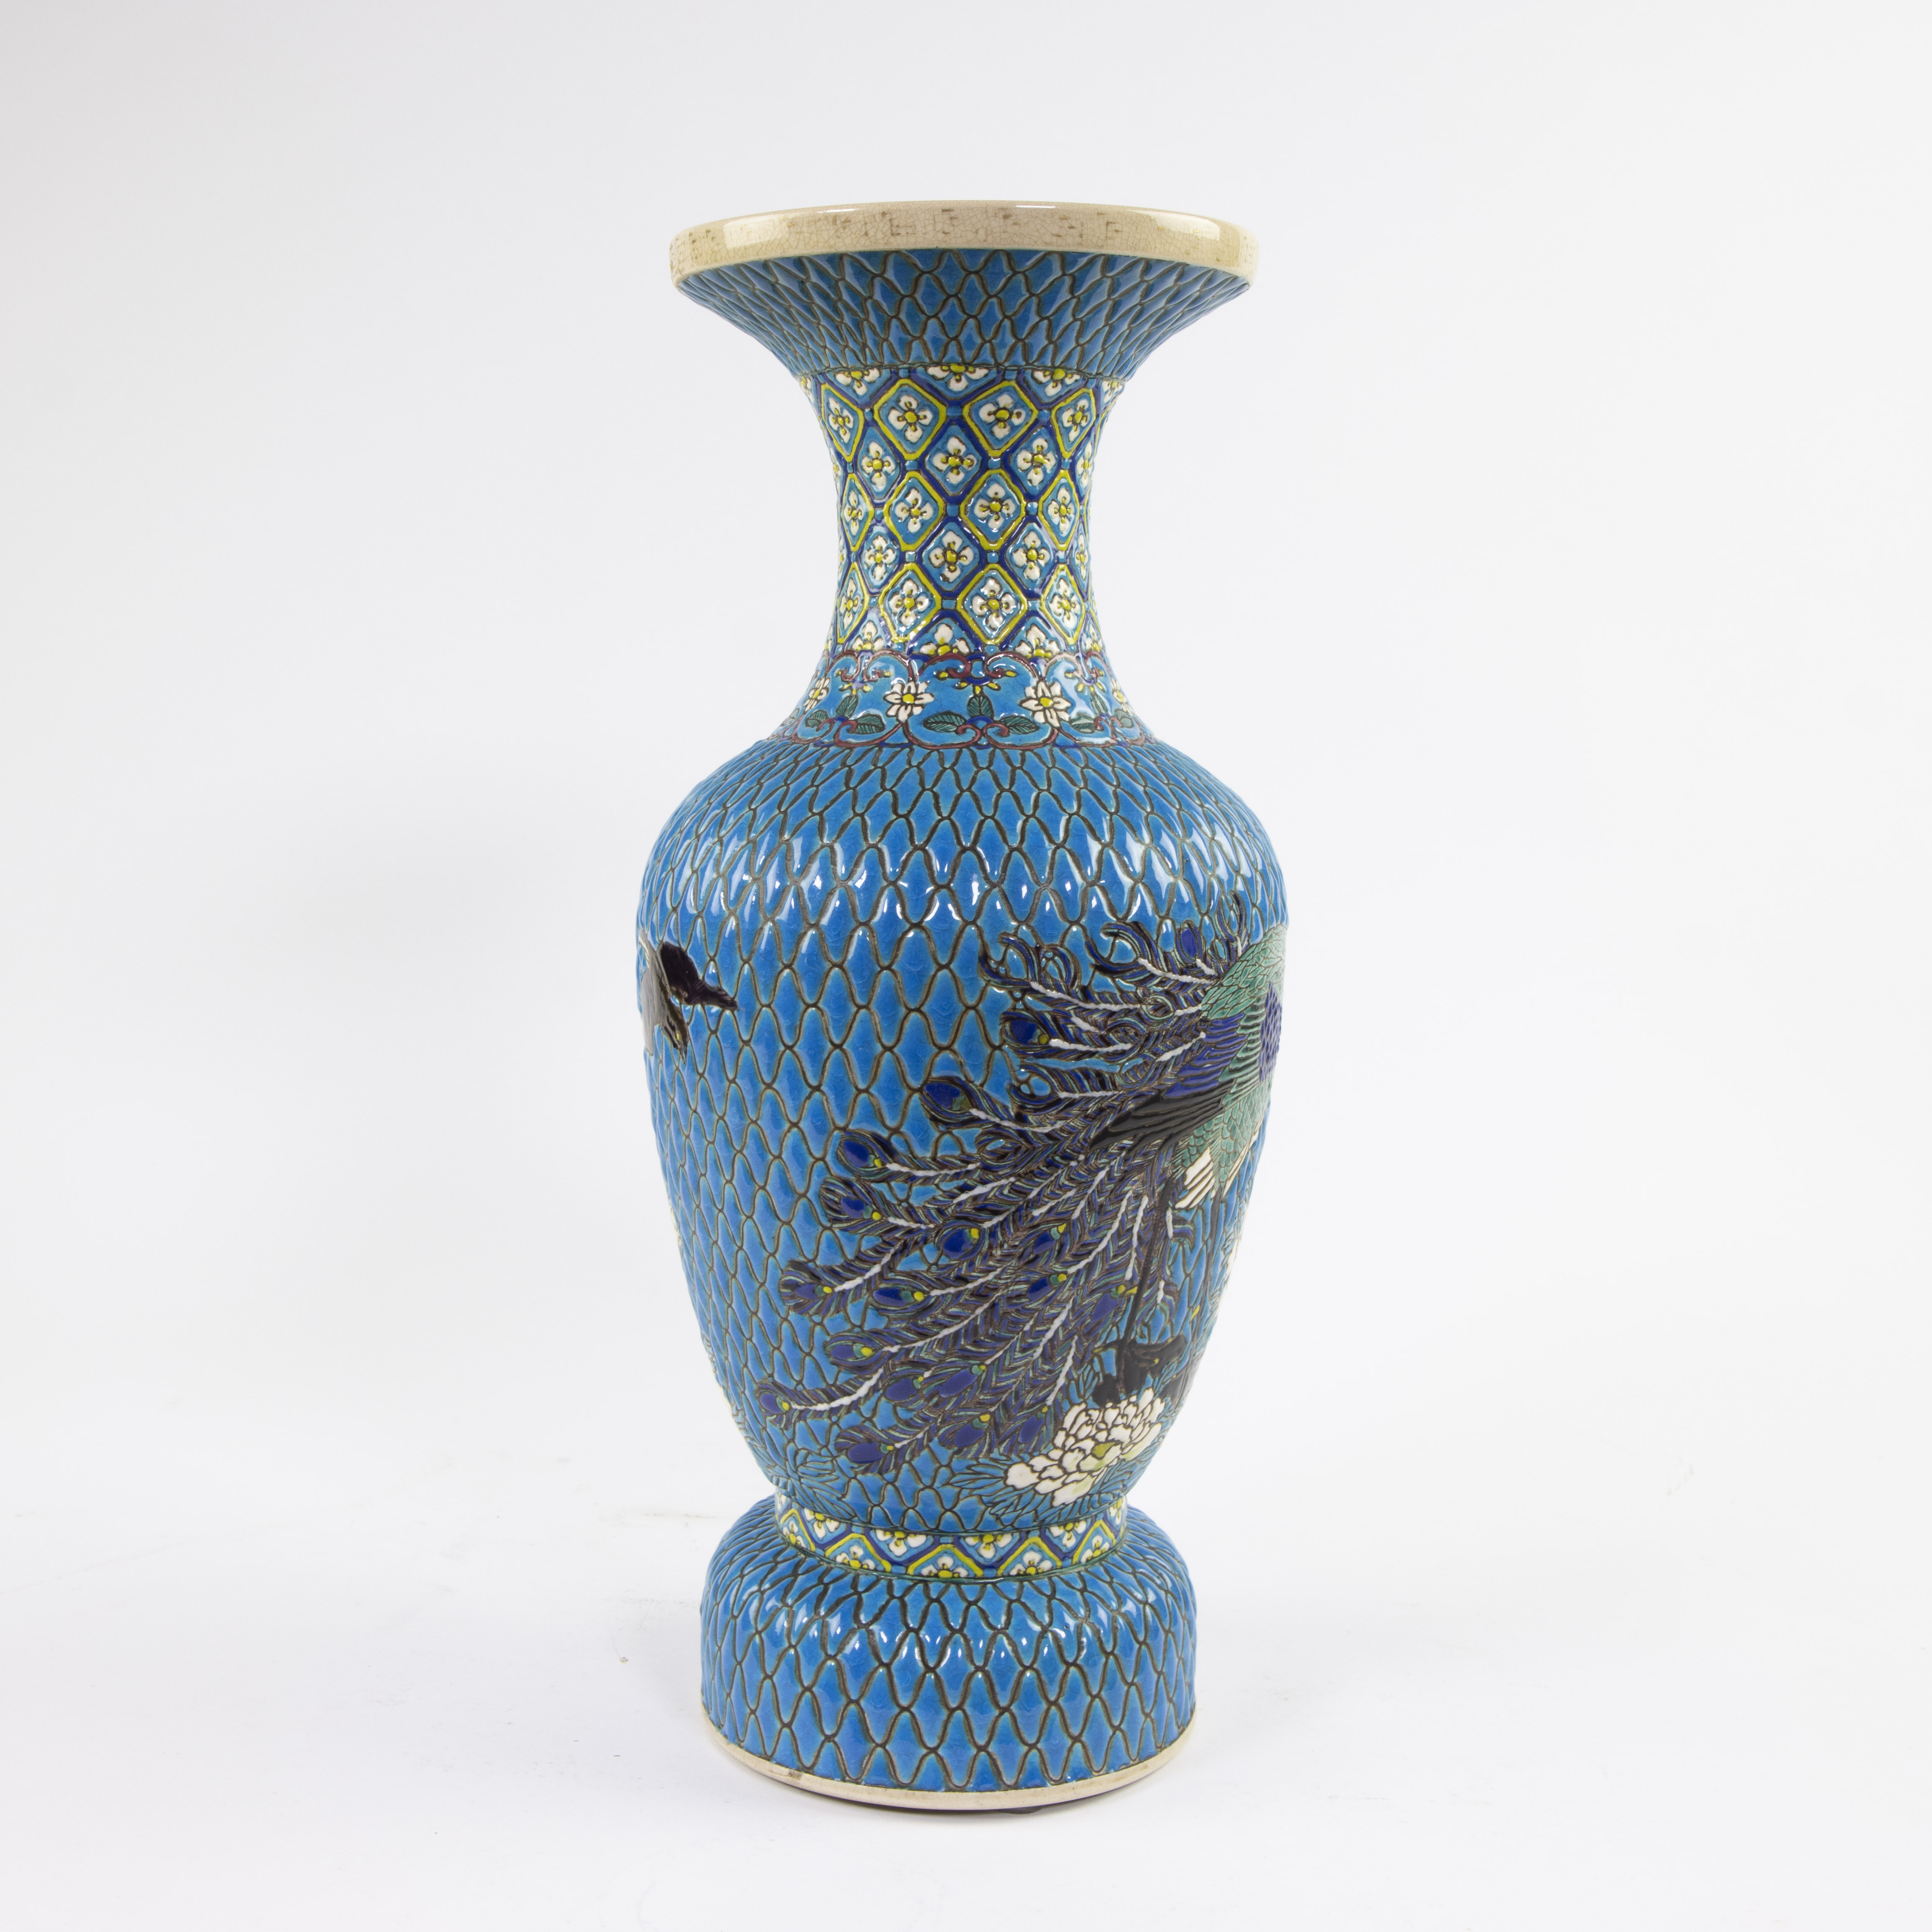 Large vase with crane and swallows on blue background, Meiji period - Image 4 of 7